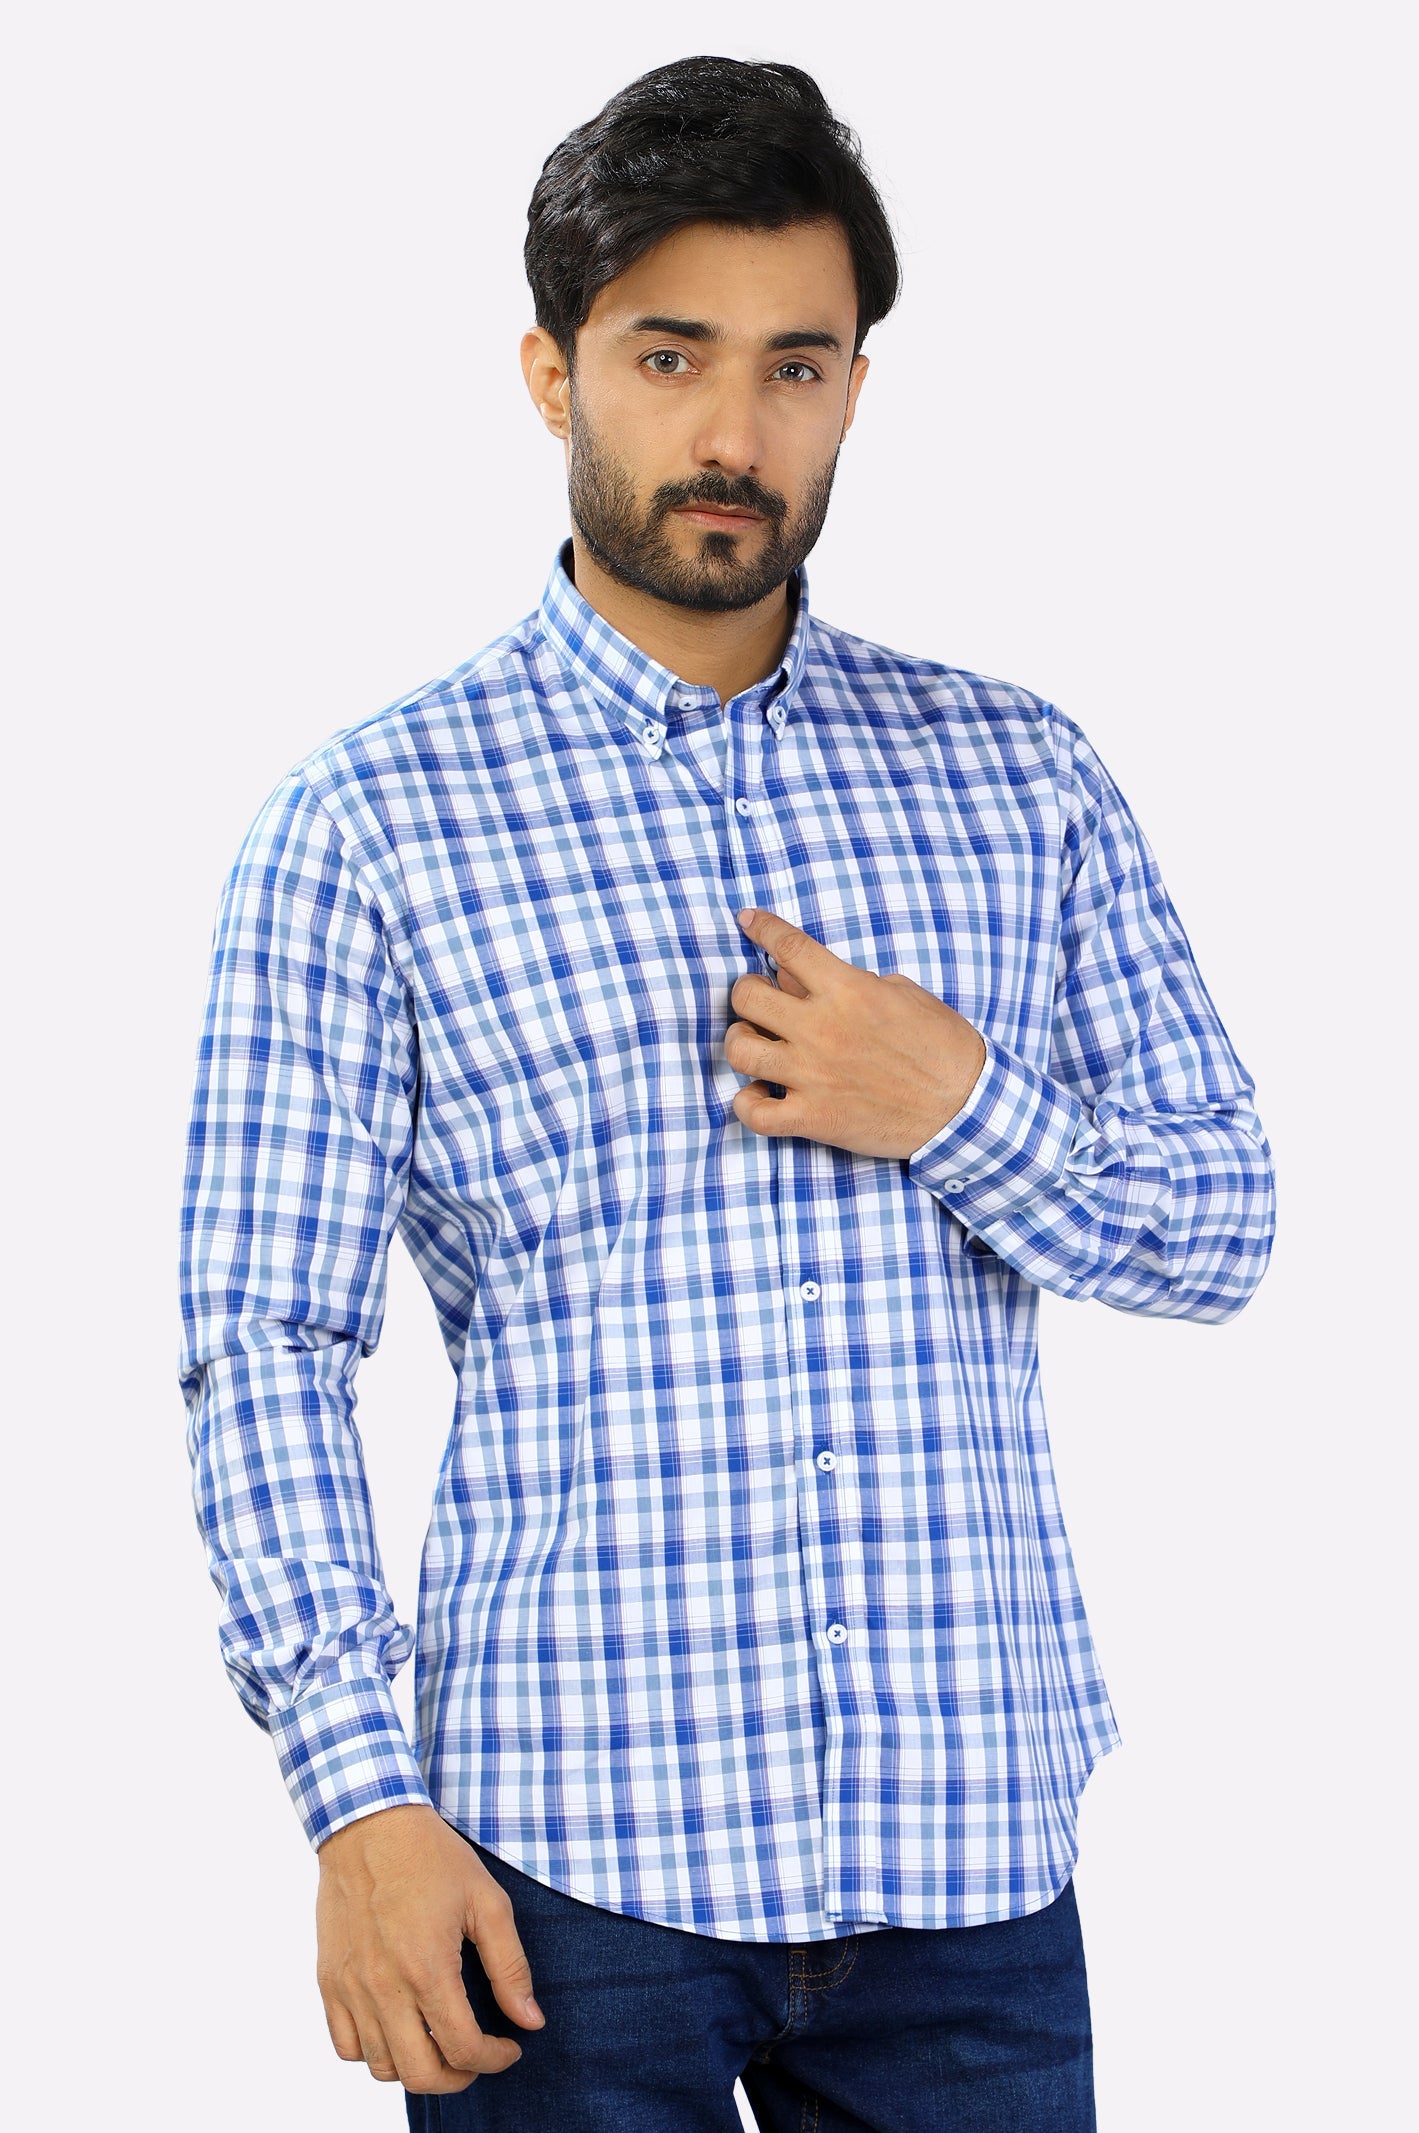 Blue Gingham Check Casual Shirt From Diners